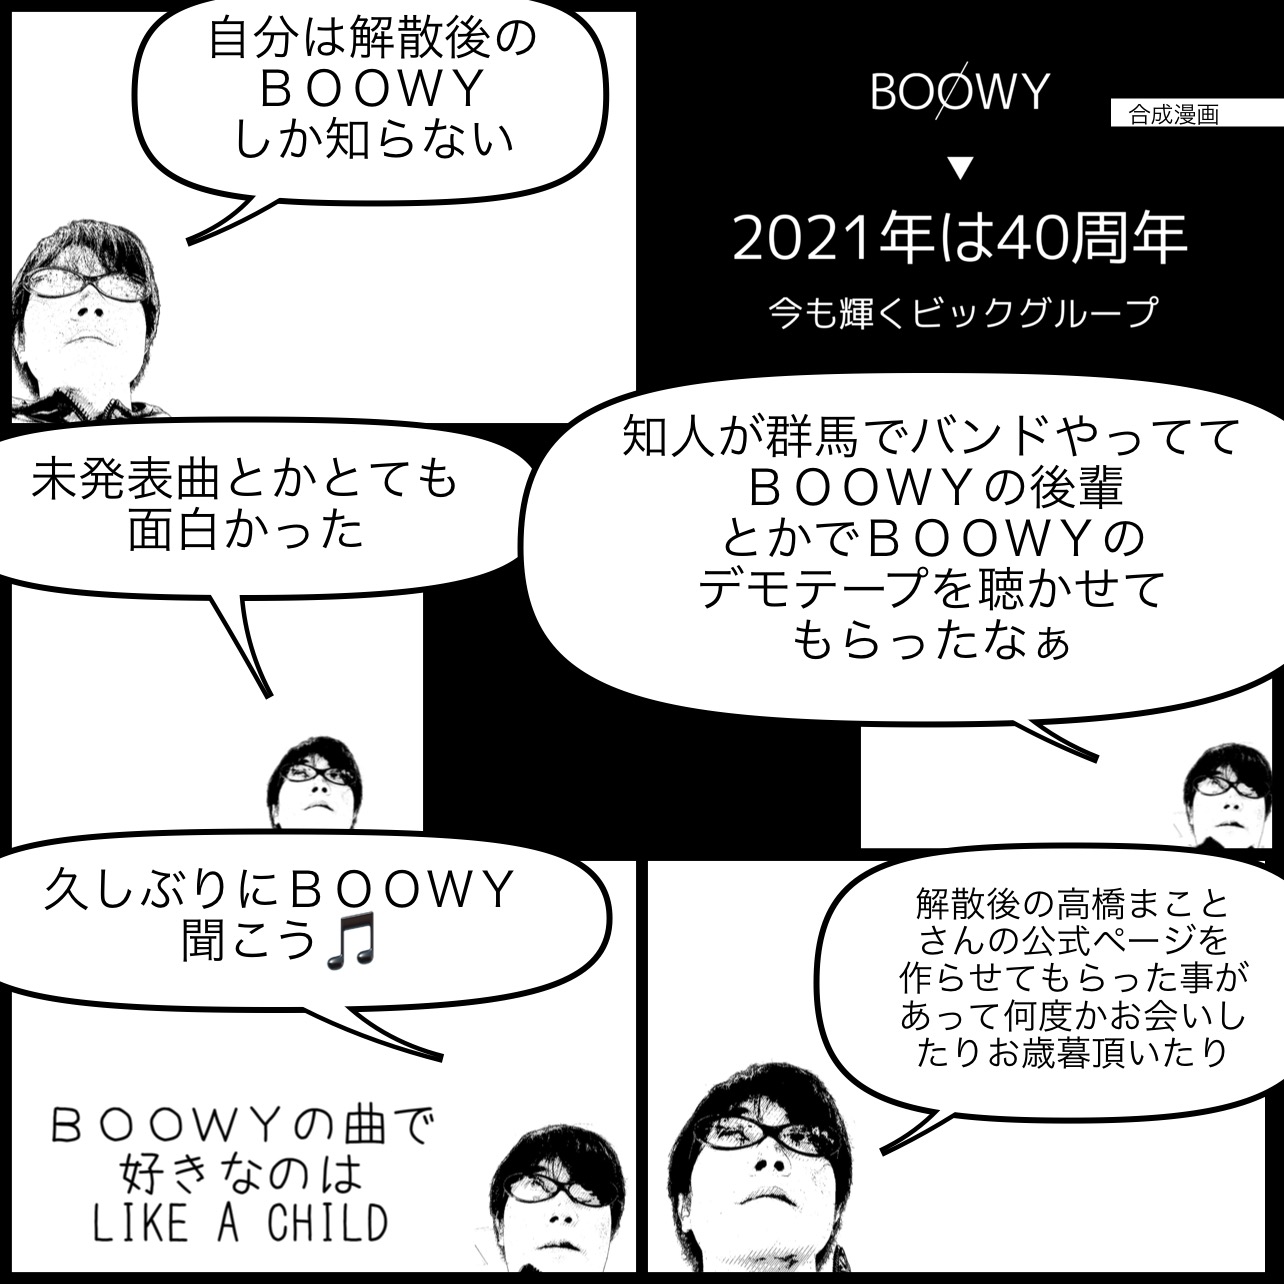 BOOWY40周年